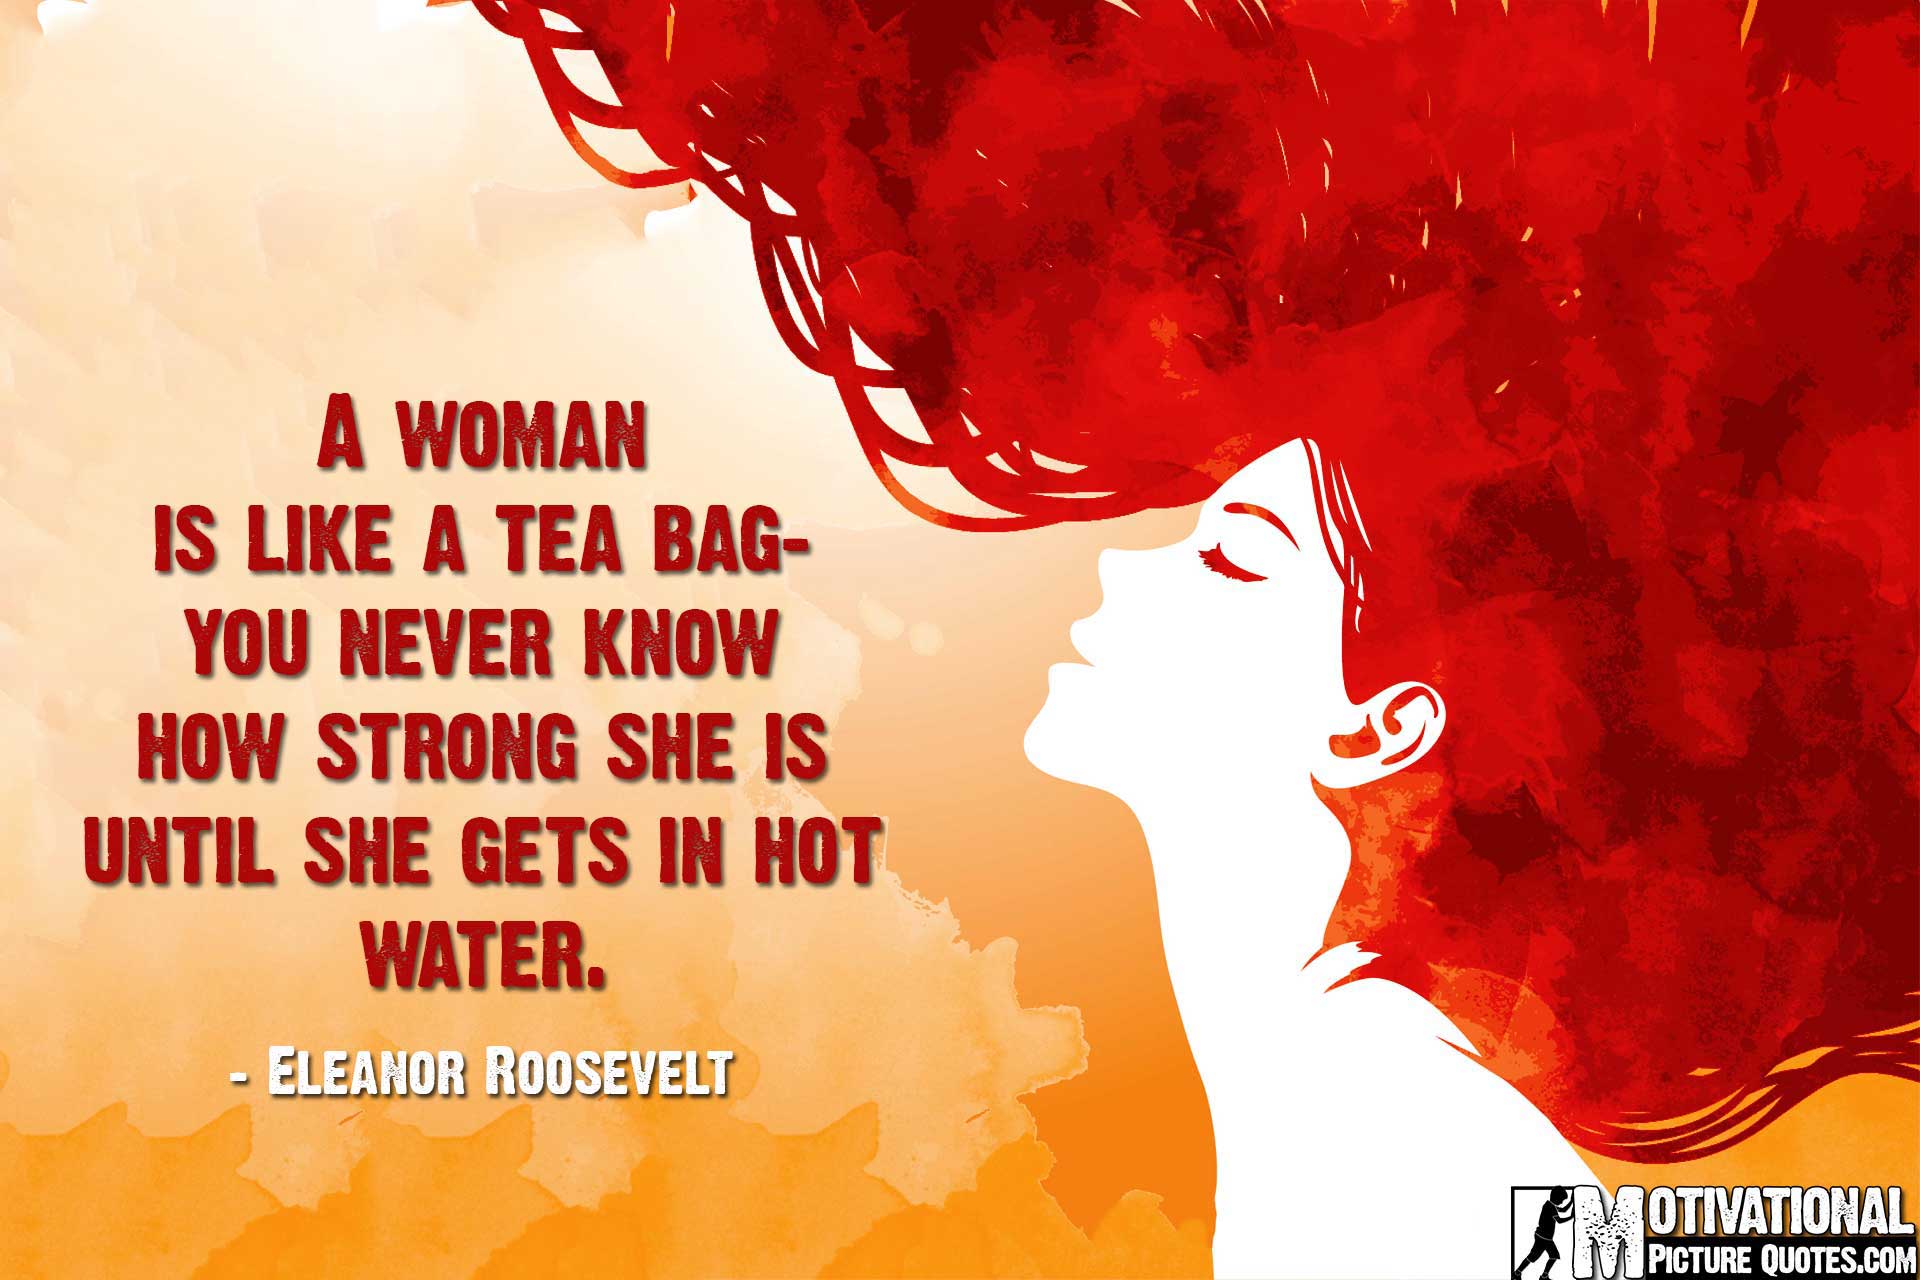 Women Empowerment Quotes With Image